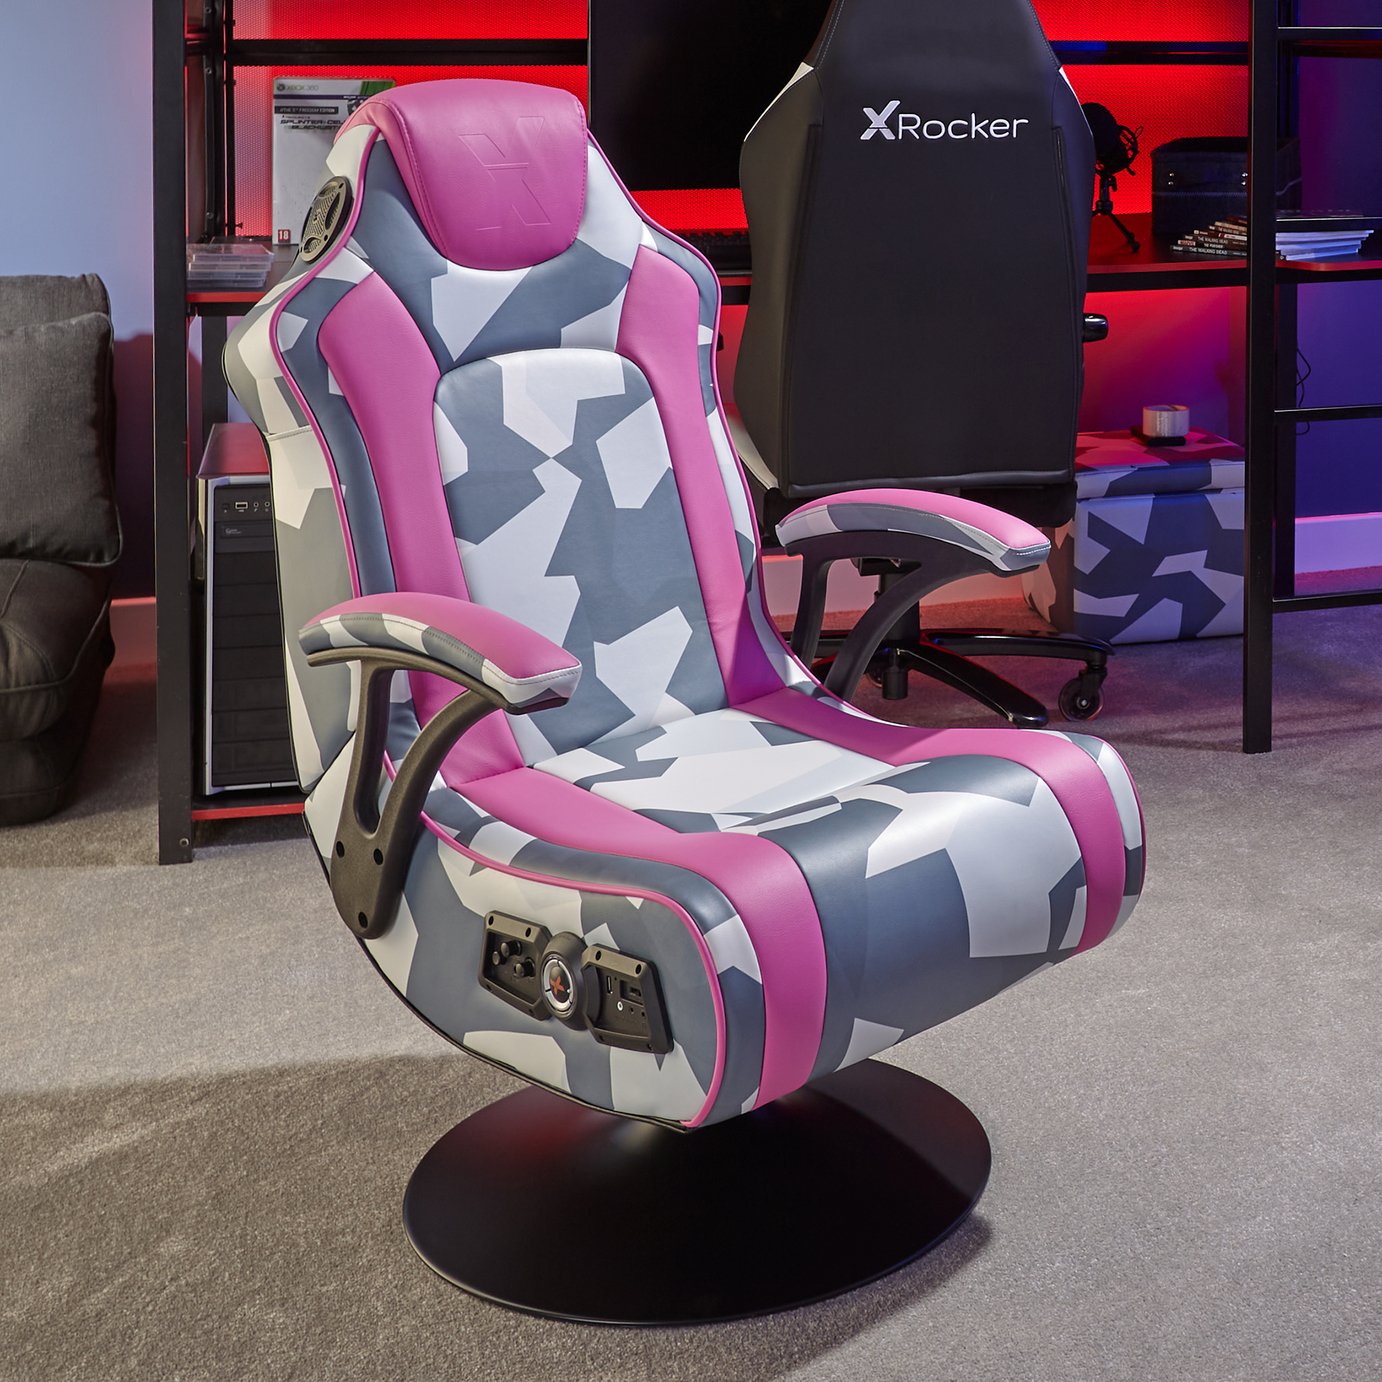 X Rocker Geo Camo 2.1 Stereo Audio Gaming Chair -Grey & Pink Review